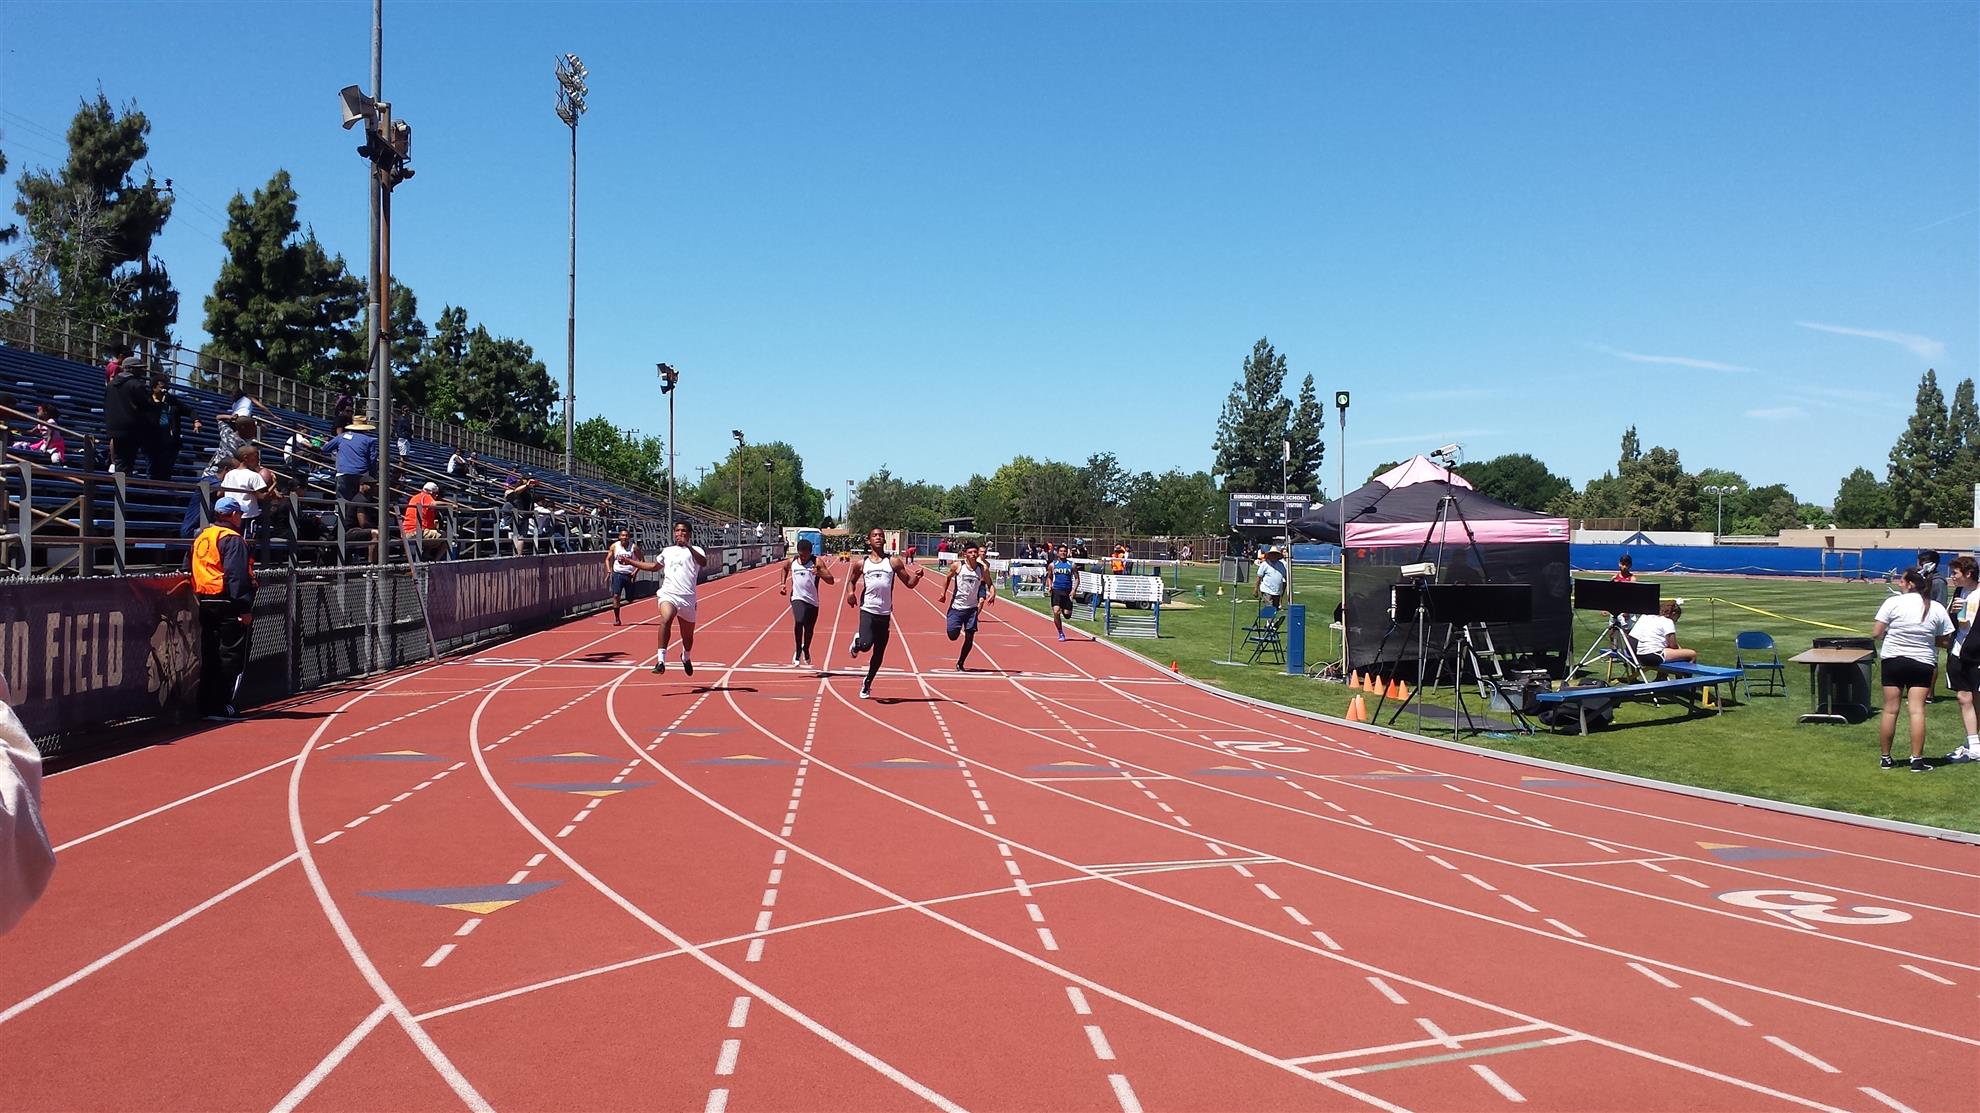 37th Annual track Meet Event Rotary Club of Greater Van Nuys